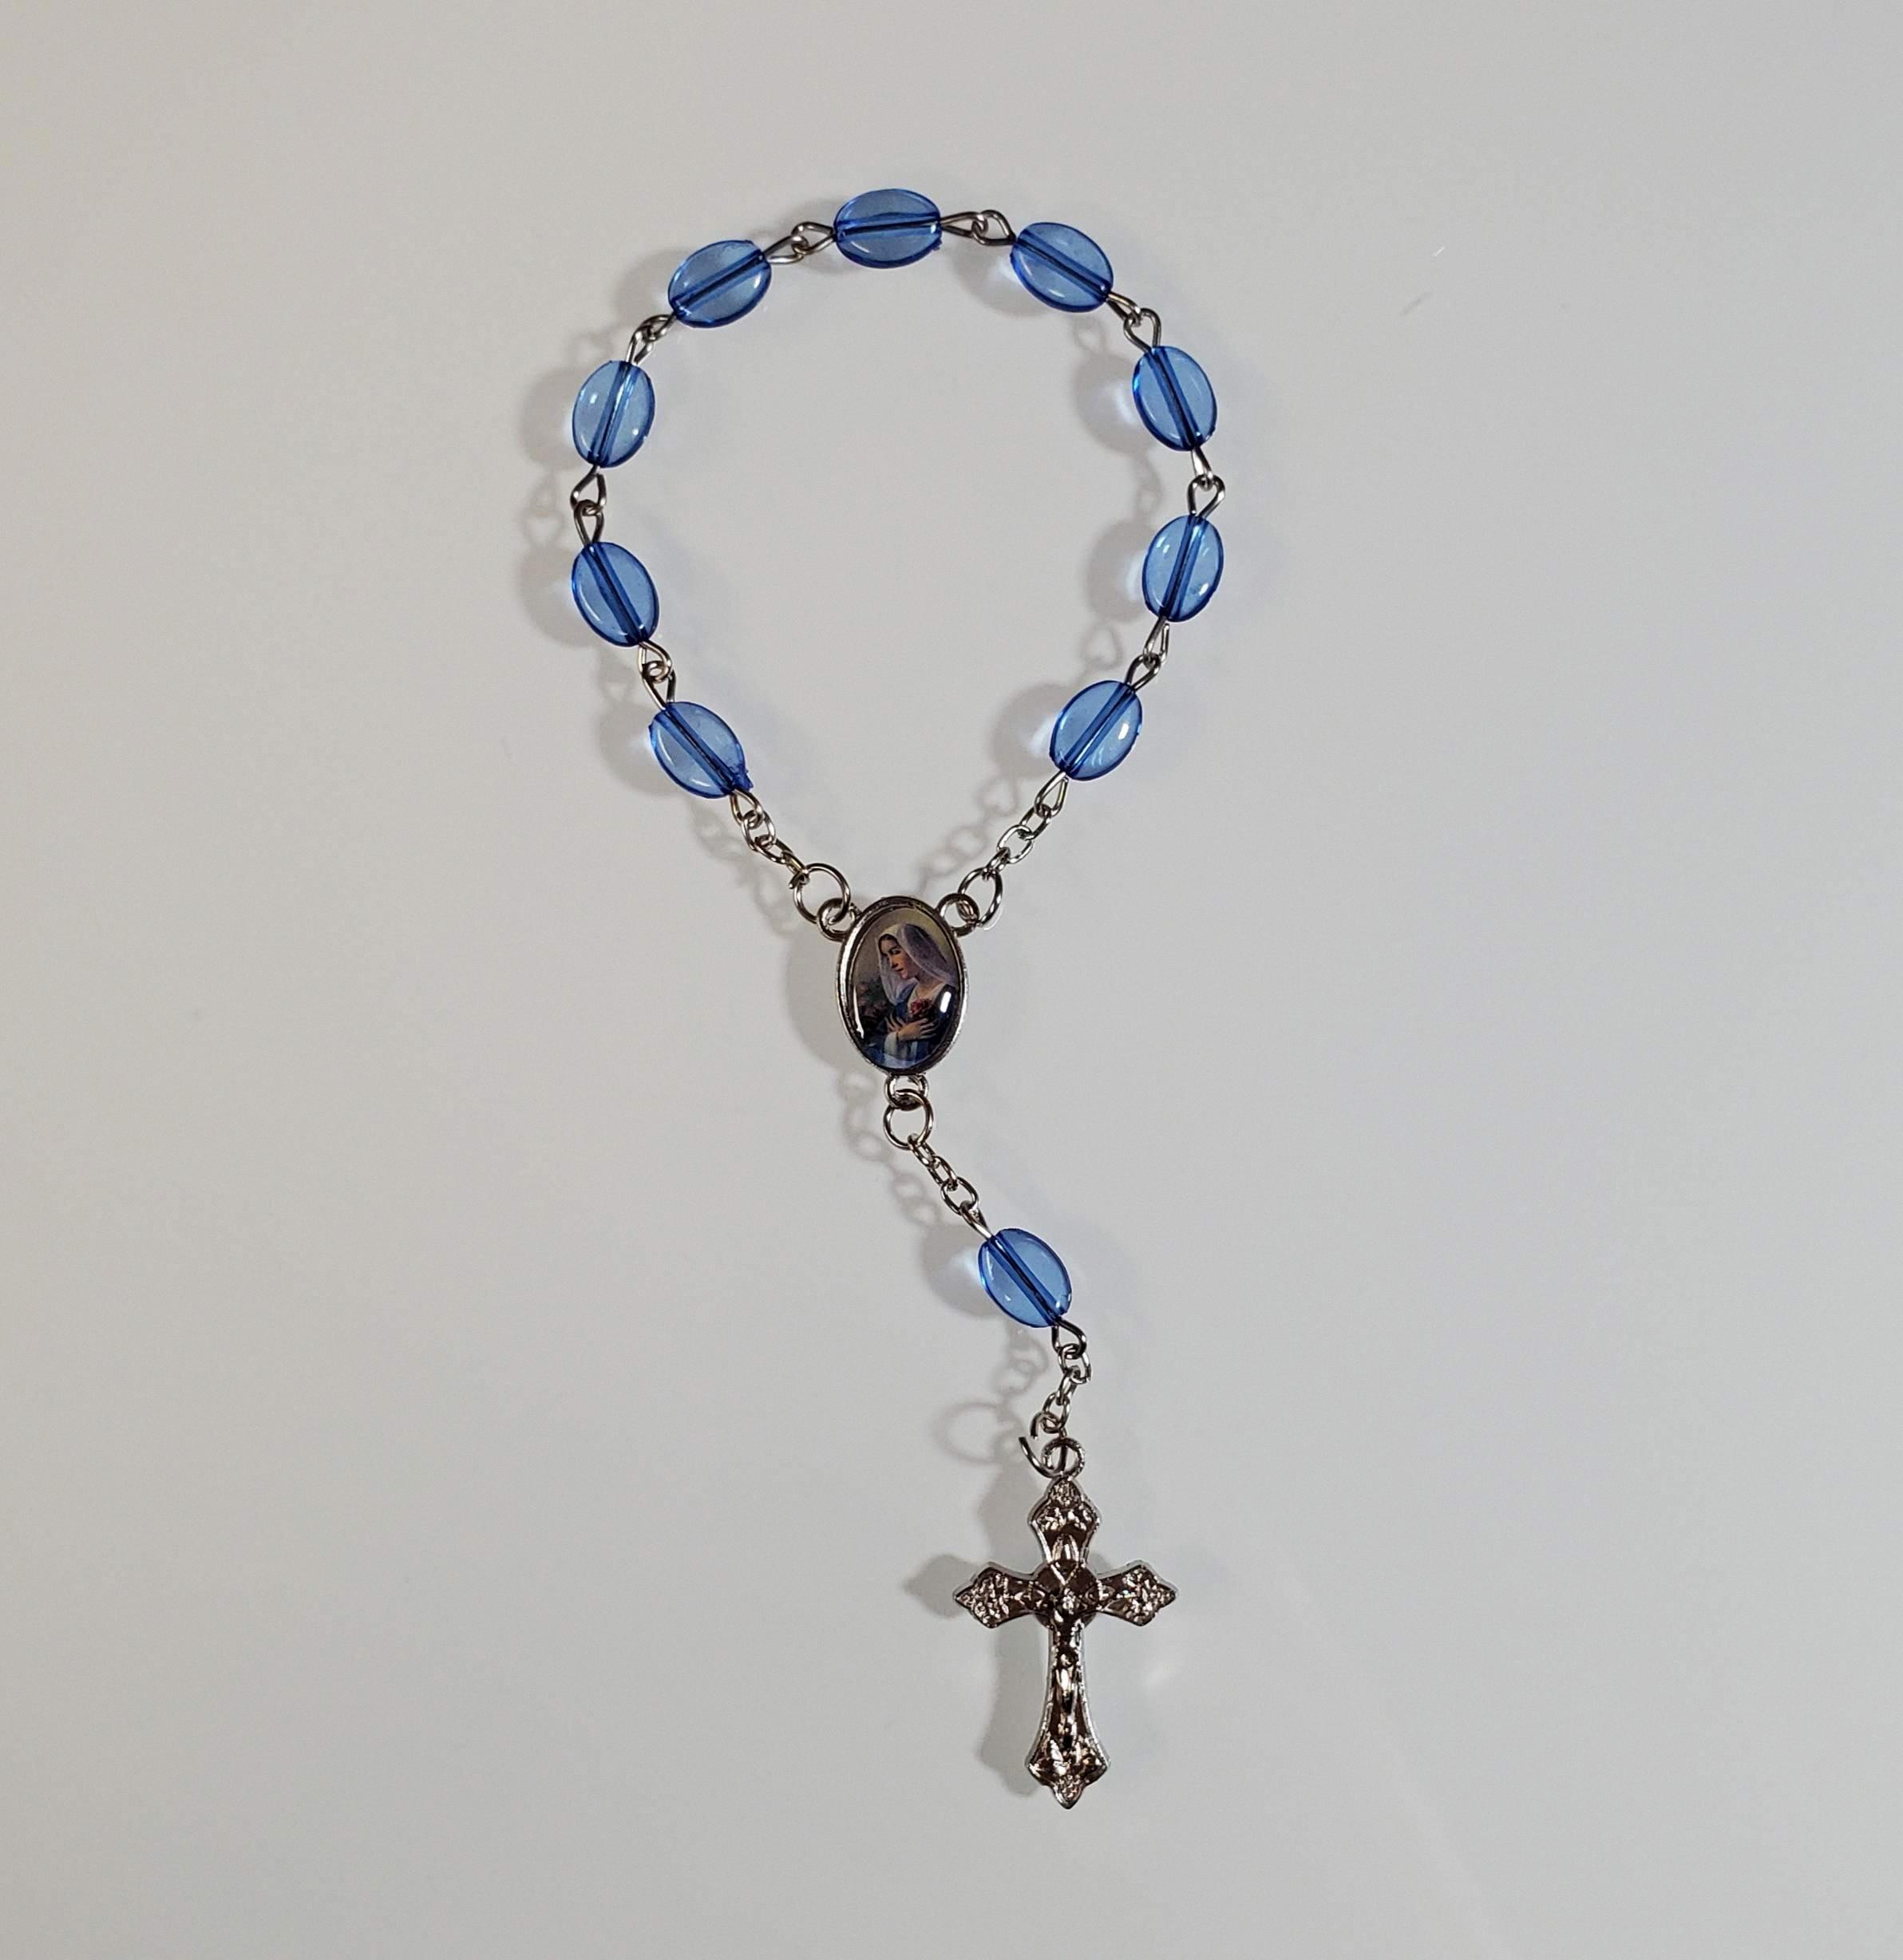 decade of the rosary